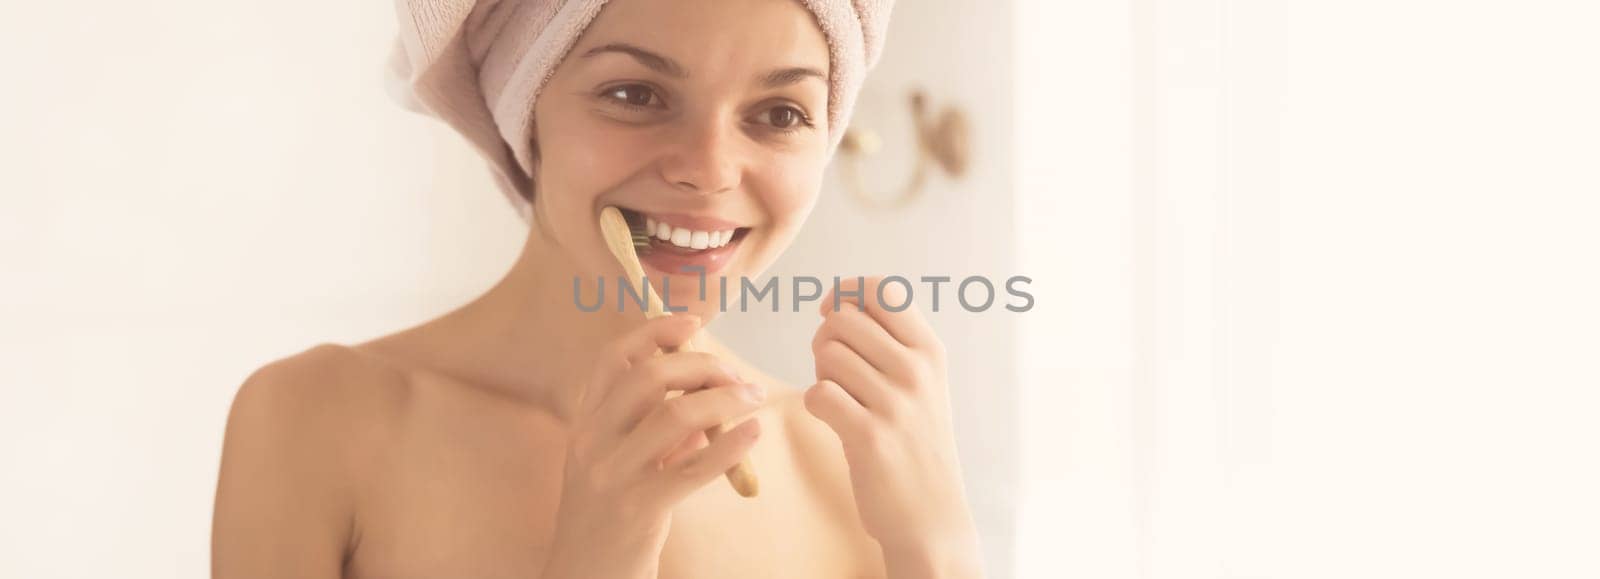 Woman brushes her teeth near the mirror. by africapink